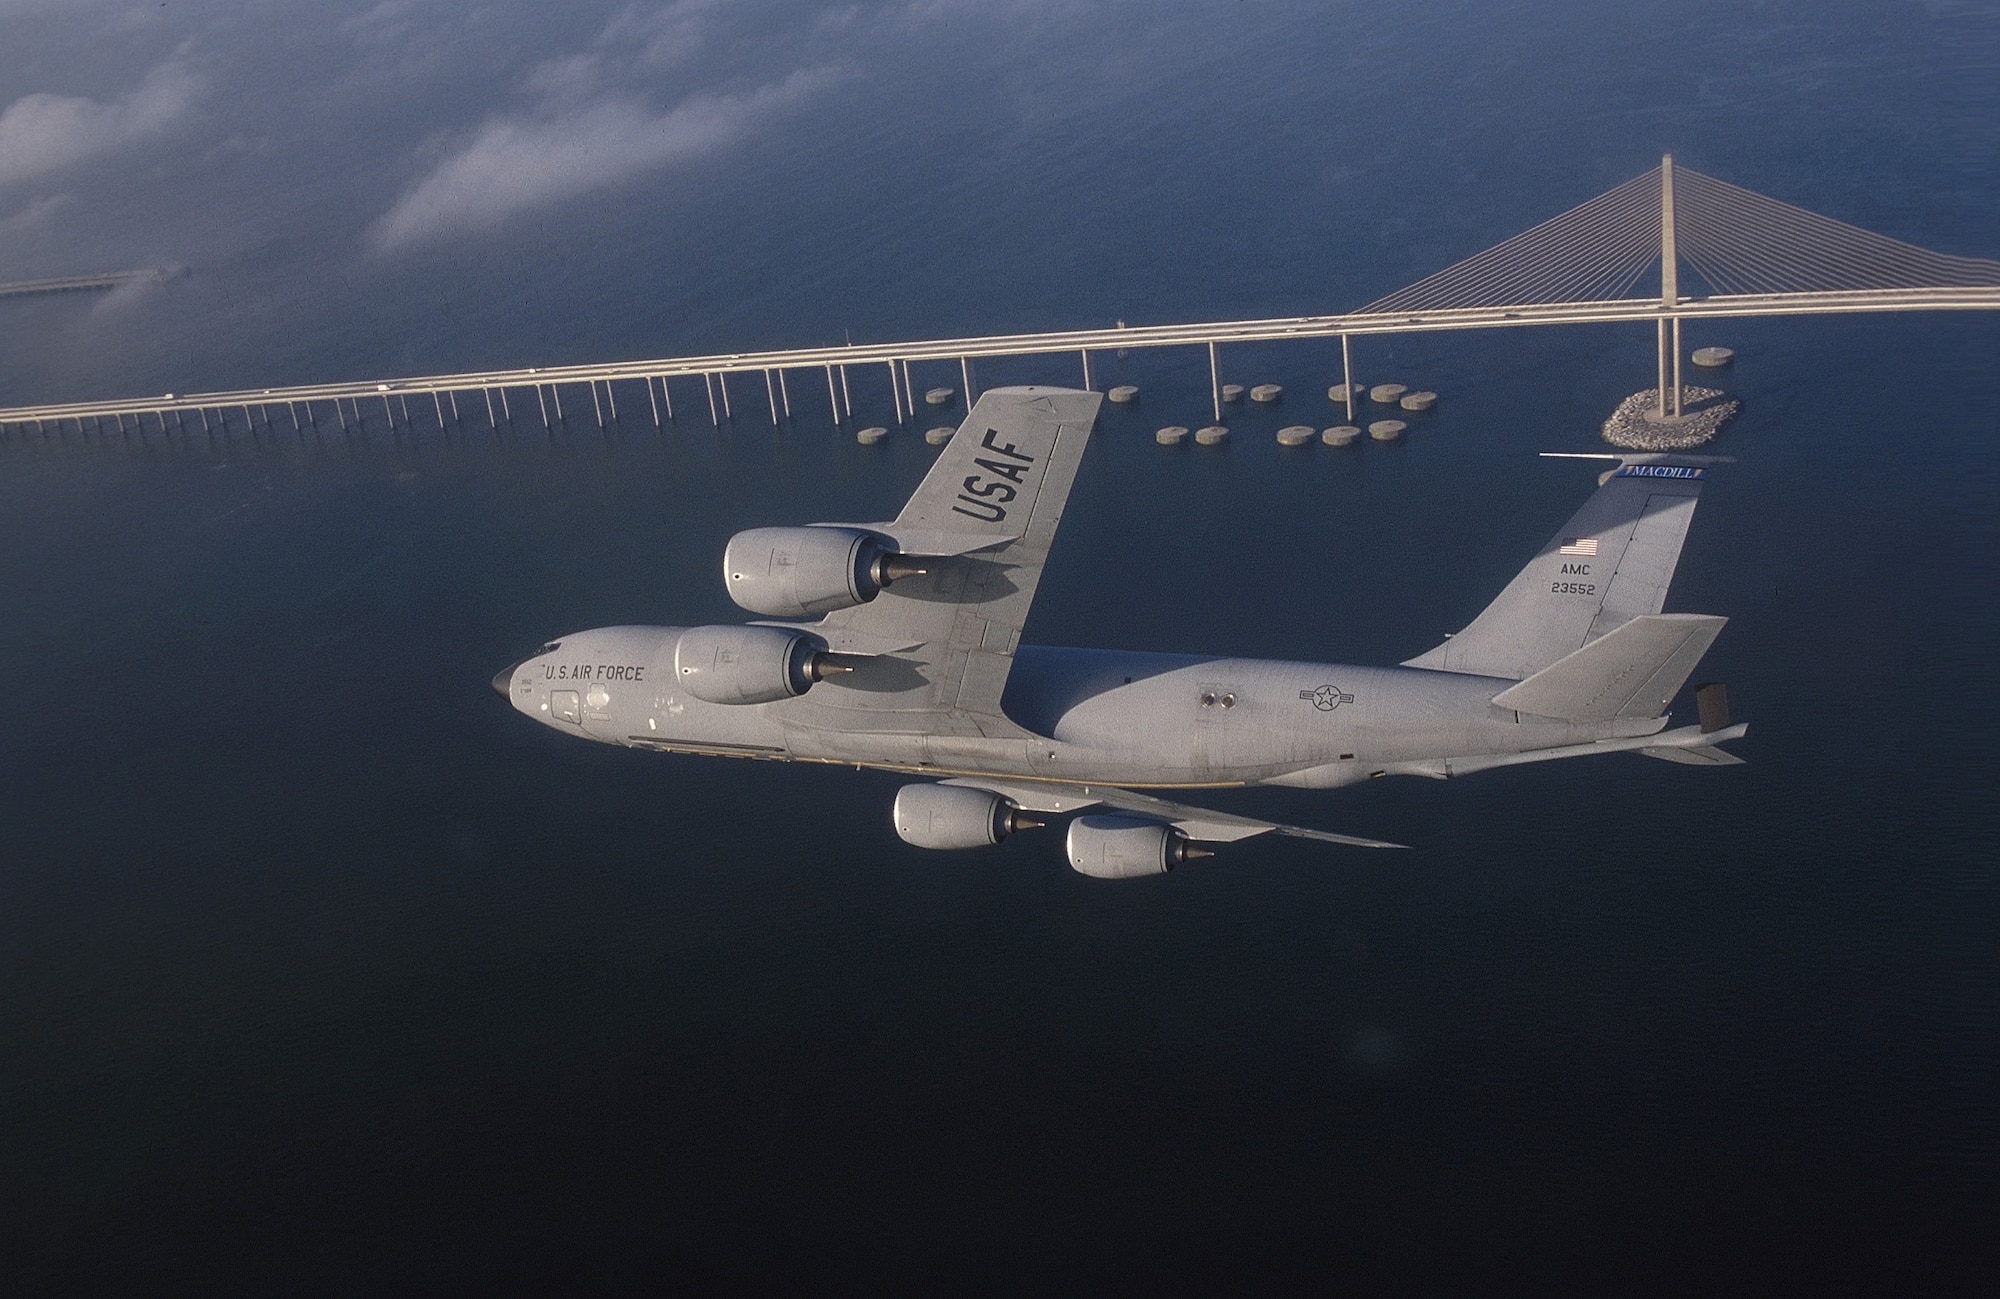 FILE PHOTO --A KC-135R Stratotanker assigned to the 6th Air Refueling Wing, 91st Air Refueling Squadron, at MacDill Air Force Base, Fla., flies a training mission over central Florida. The KC-135's principal mission is air refueling. This asset greatly enhances the U. S. Air Force's capability to accomplish its mission of Global Engagement. It also provides aerial refueling support to U.S. Navy, U.S. Marine Corps and allied aircraft. Four turbofans, mounted under 35-degree swept wings, power the KC-135 to takeoffs at gross weights up to 322,500 pounds. Nearly all internal fuel can be pumped through the tanker's flying boom, the KC-135's primary fuel transfer method. A special shuttlecock-shaped drogue, attached to and trailed behind the flying boom, may be used to refuel aircraft fitted with probes. (U.S. Air Force photo by Master Sgt. Keith Reed) 

